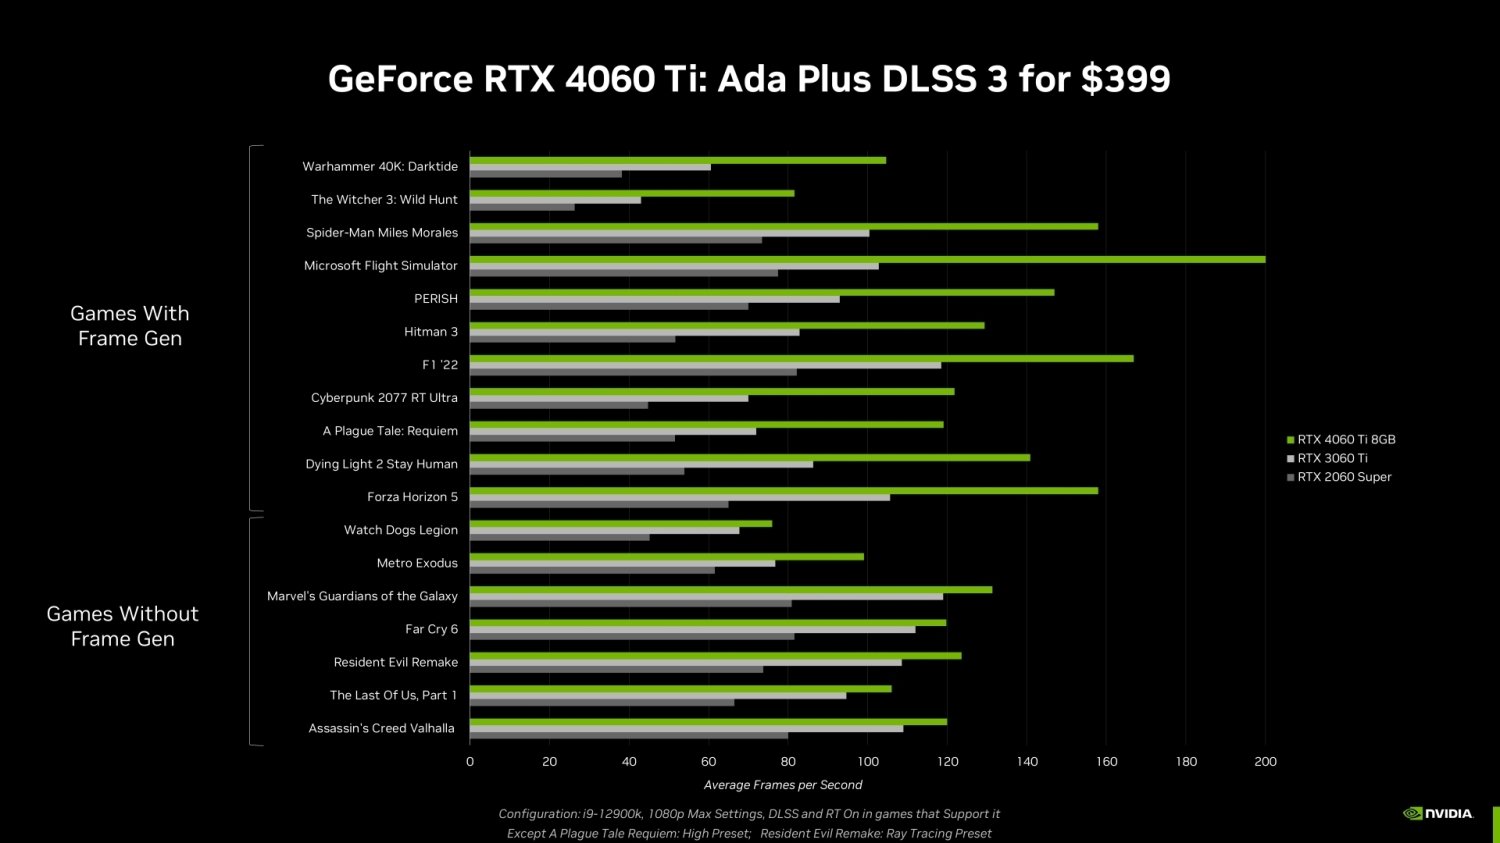 TweakTown Enlarged Image - GeForce RTX 4060 benchmarks show that not all games can run with max settings, image credit: NVIDIA.